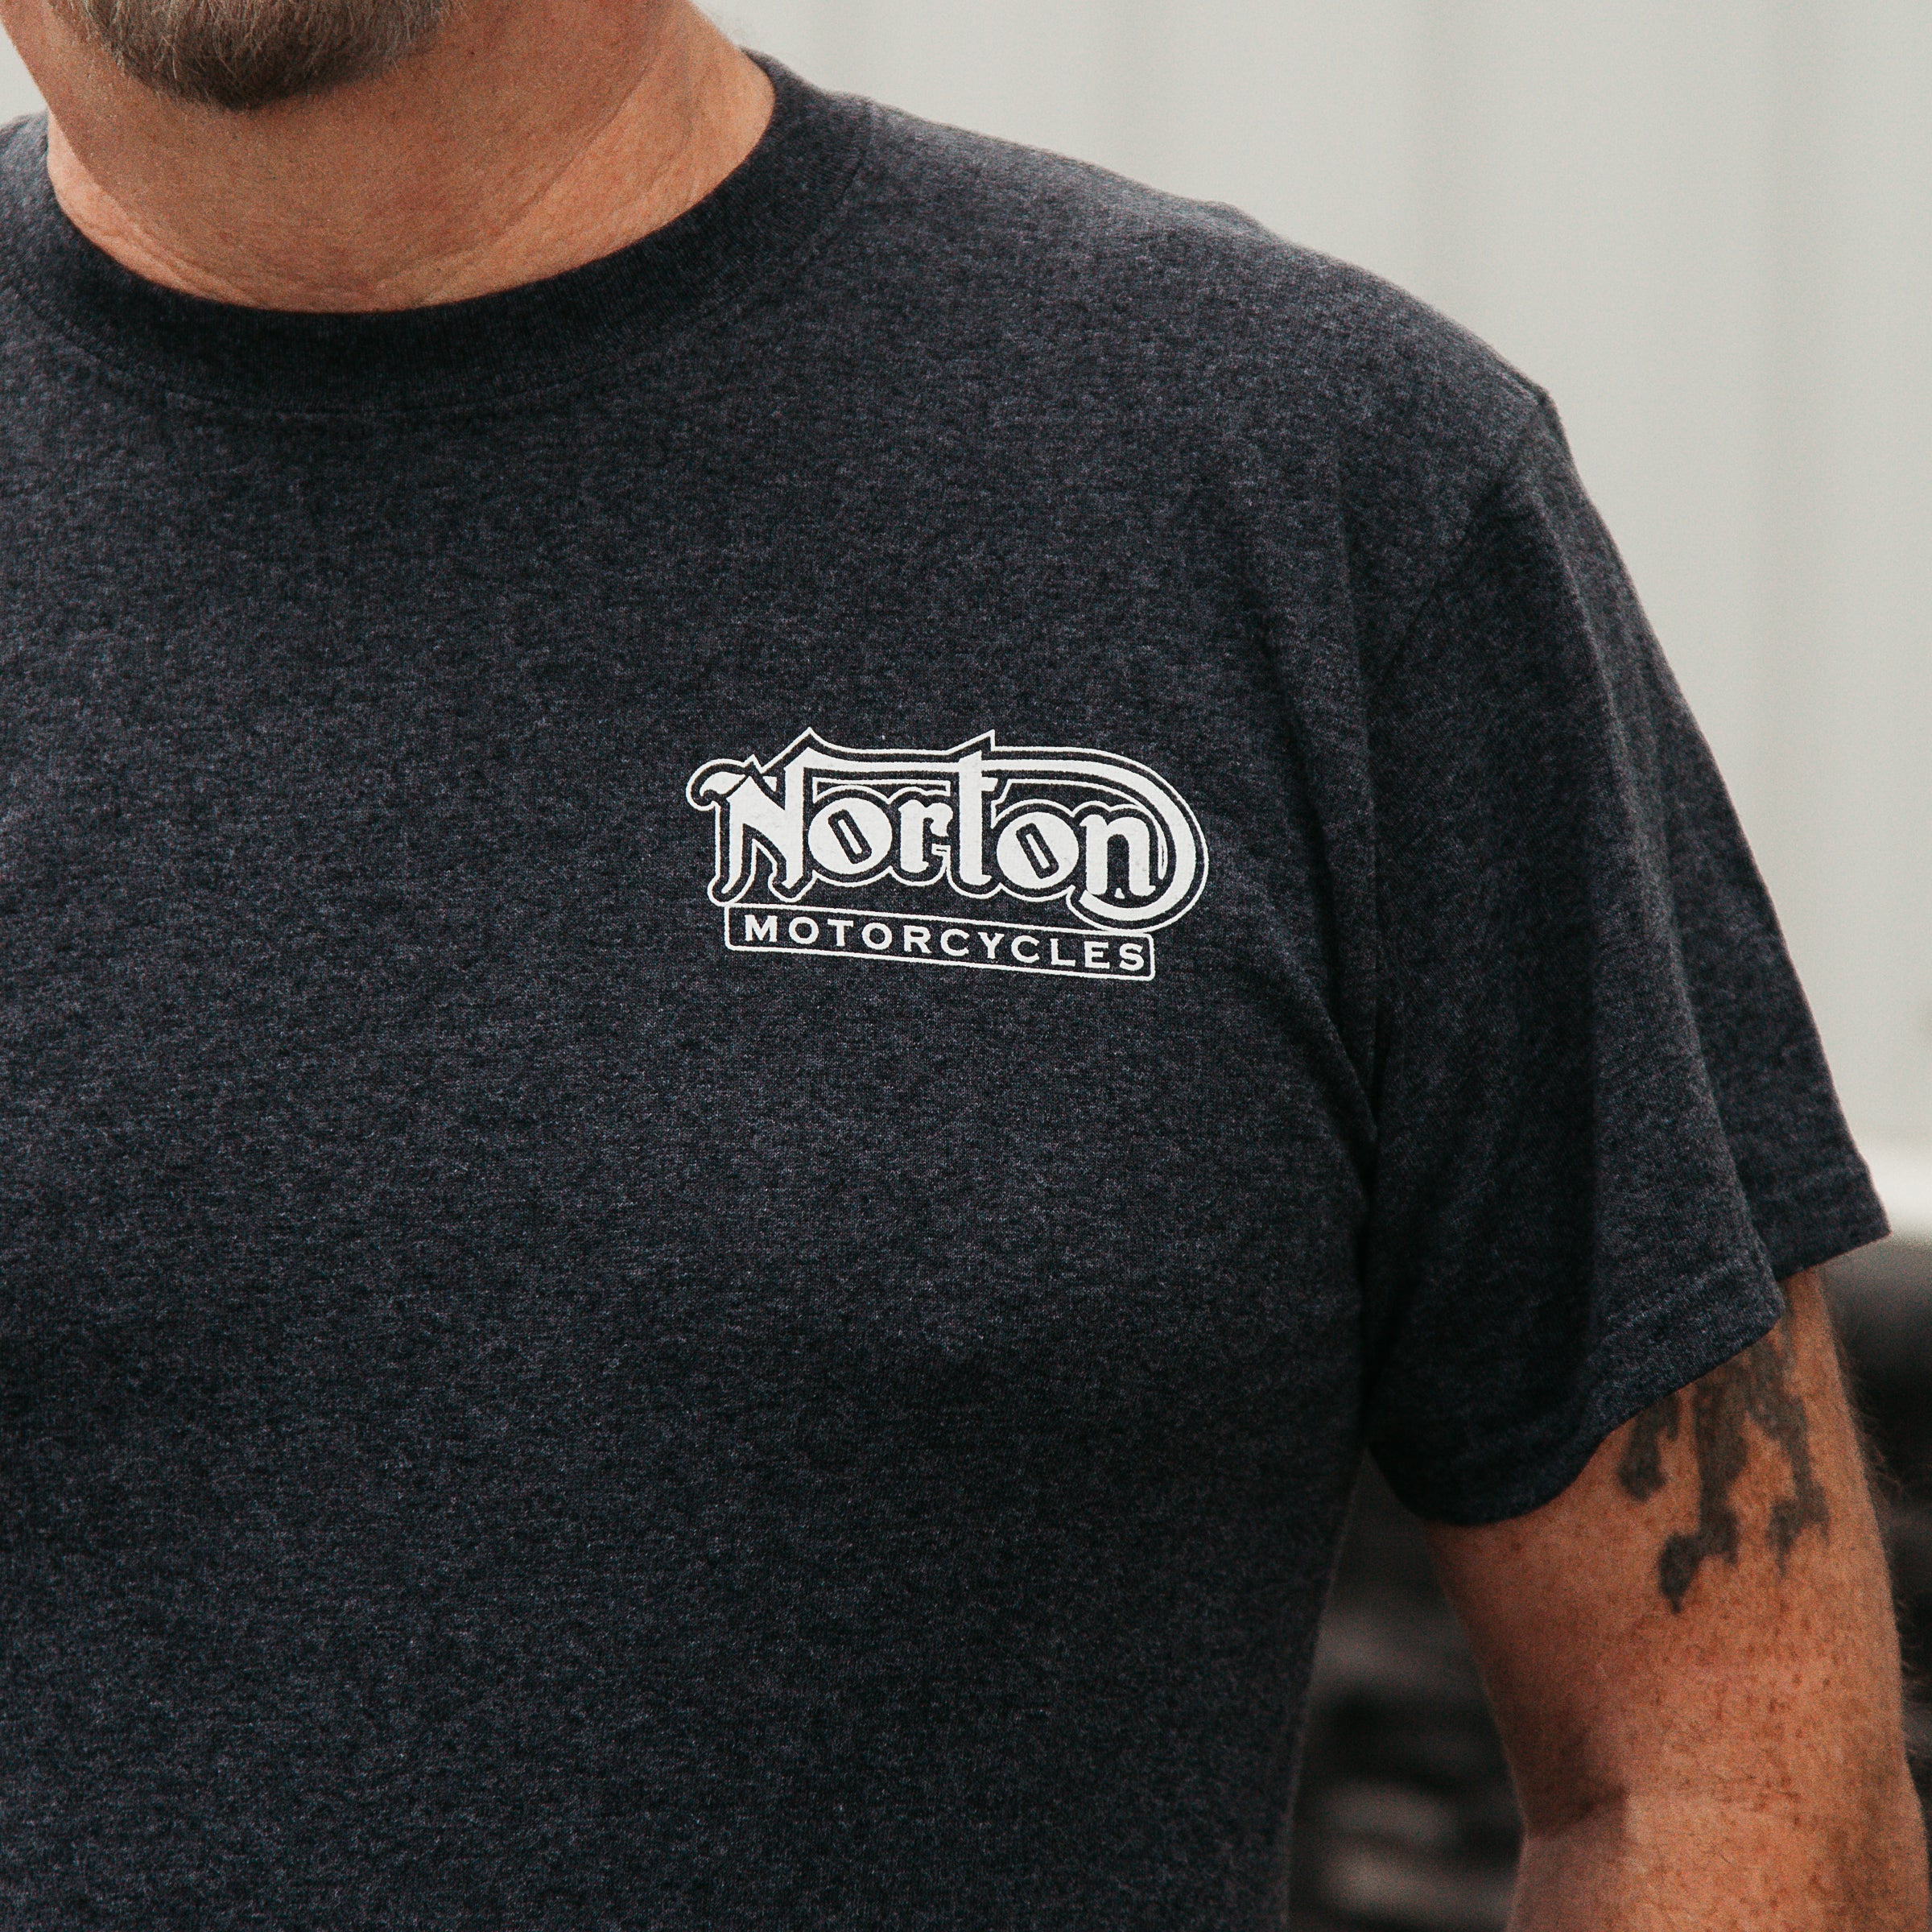 Dreamcycle Motorcycle Museum | Mens shoulder modelling norton motorcycles tshirt.